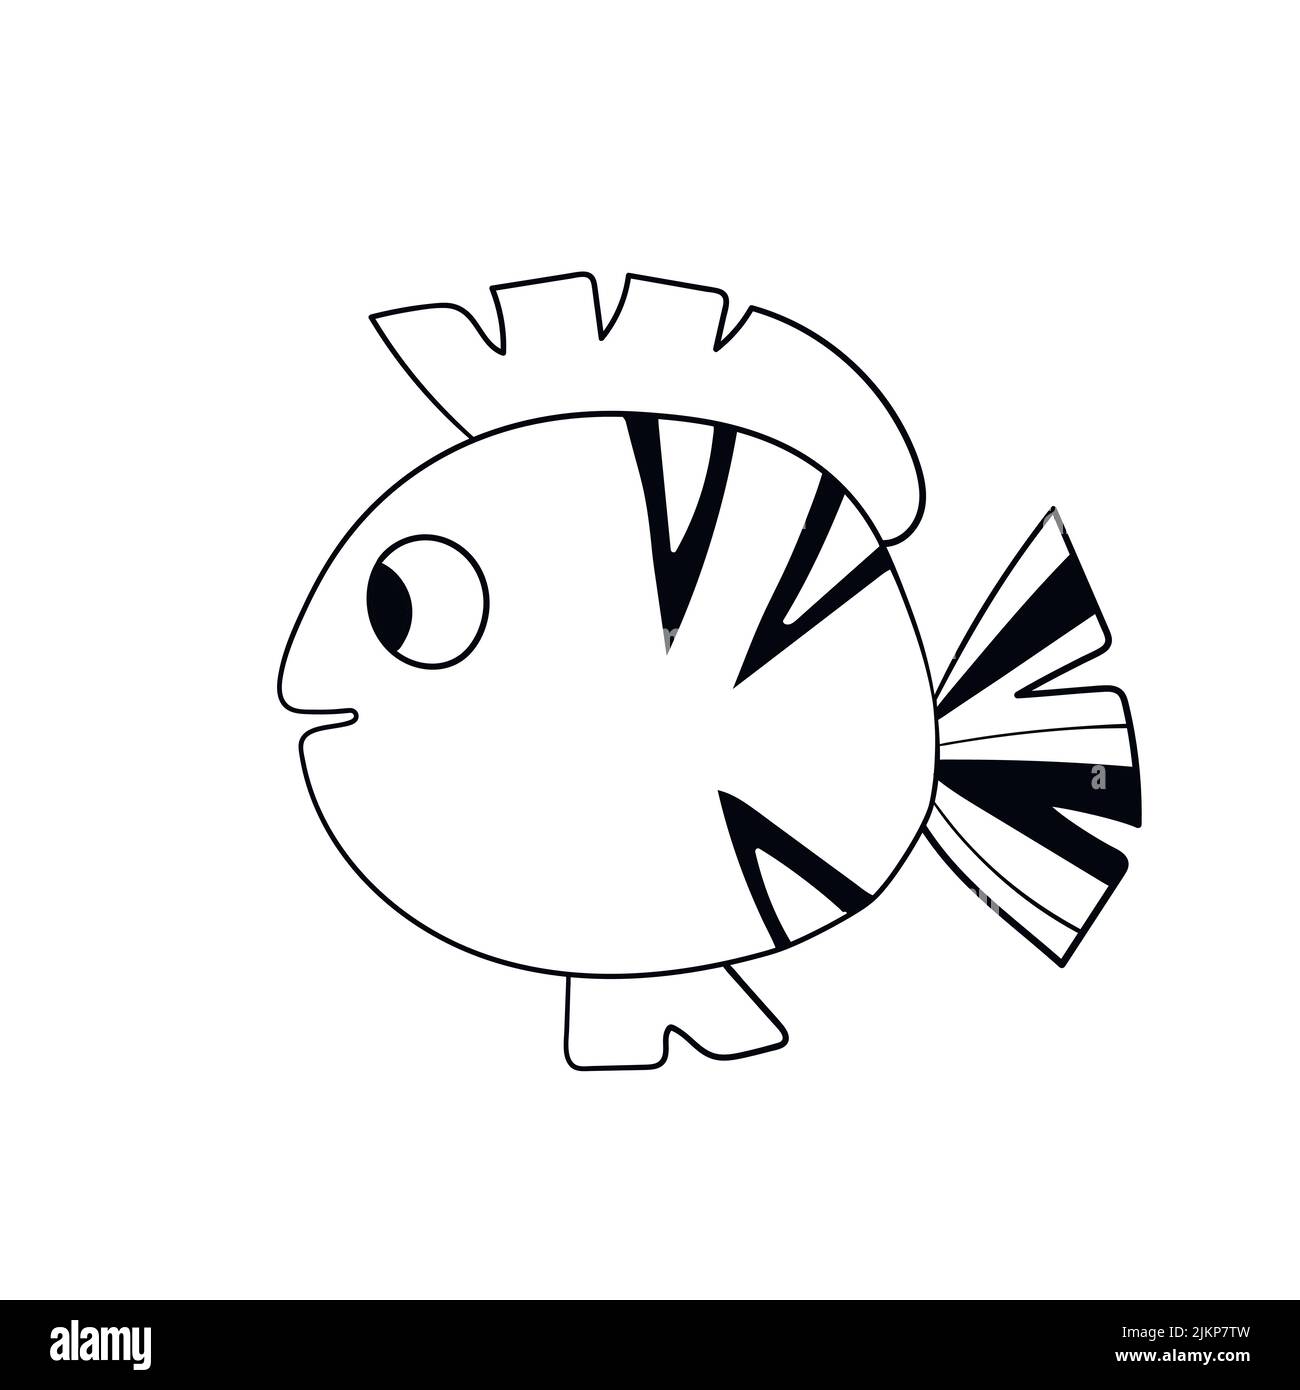 Cartoon cute fish. Hand drawing outline colouring pictures. Isolated items. Suitable for children's coloring and prints. Adorable character for card Stock Vector